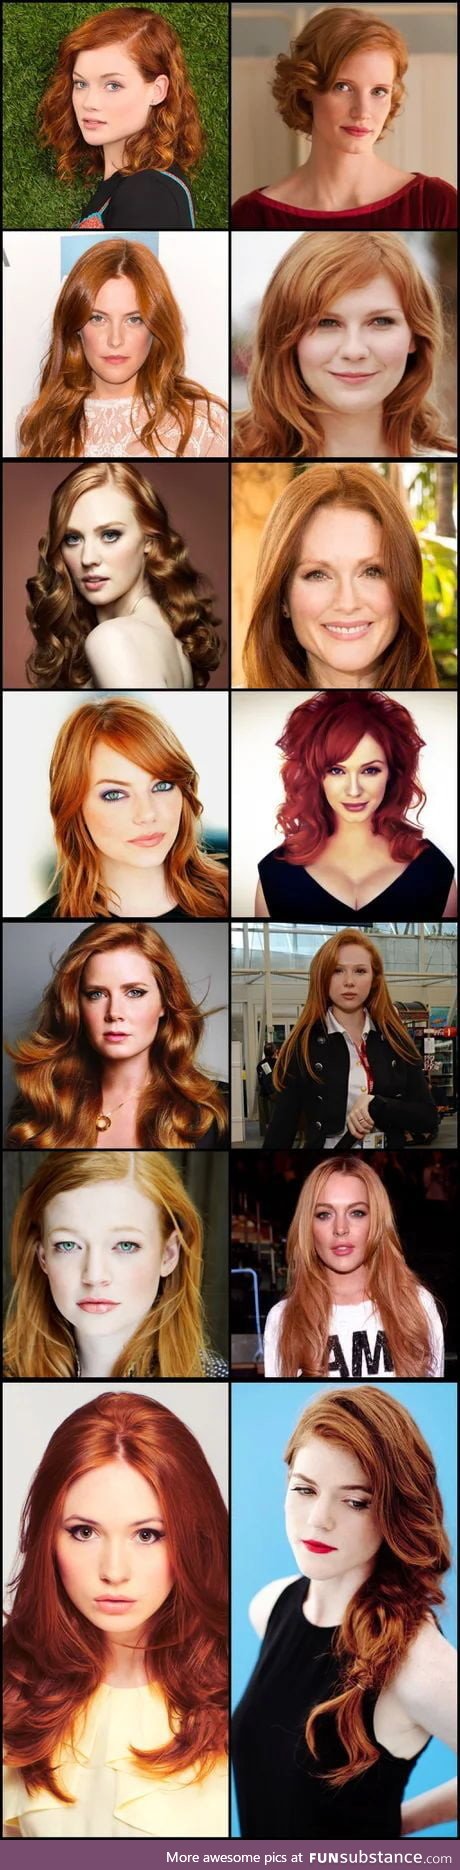 A dose of redheads